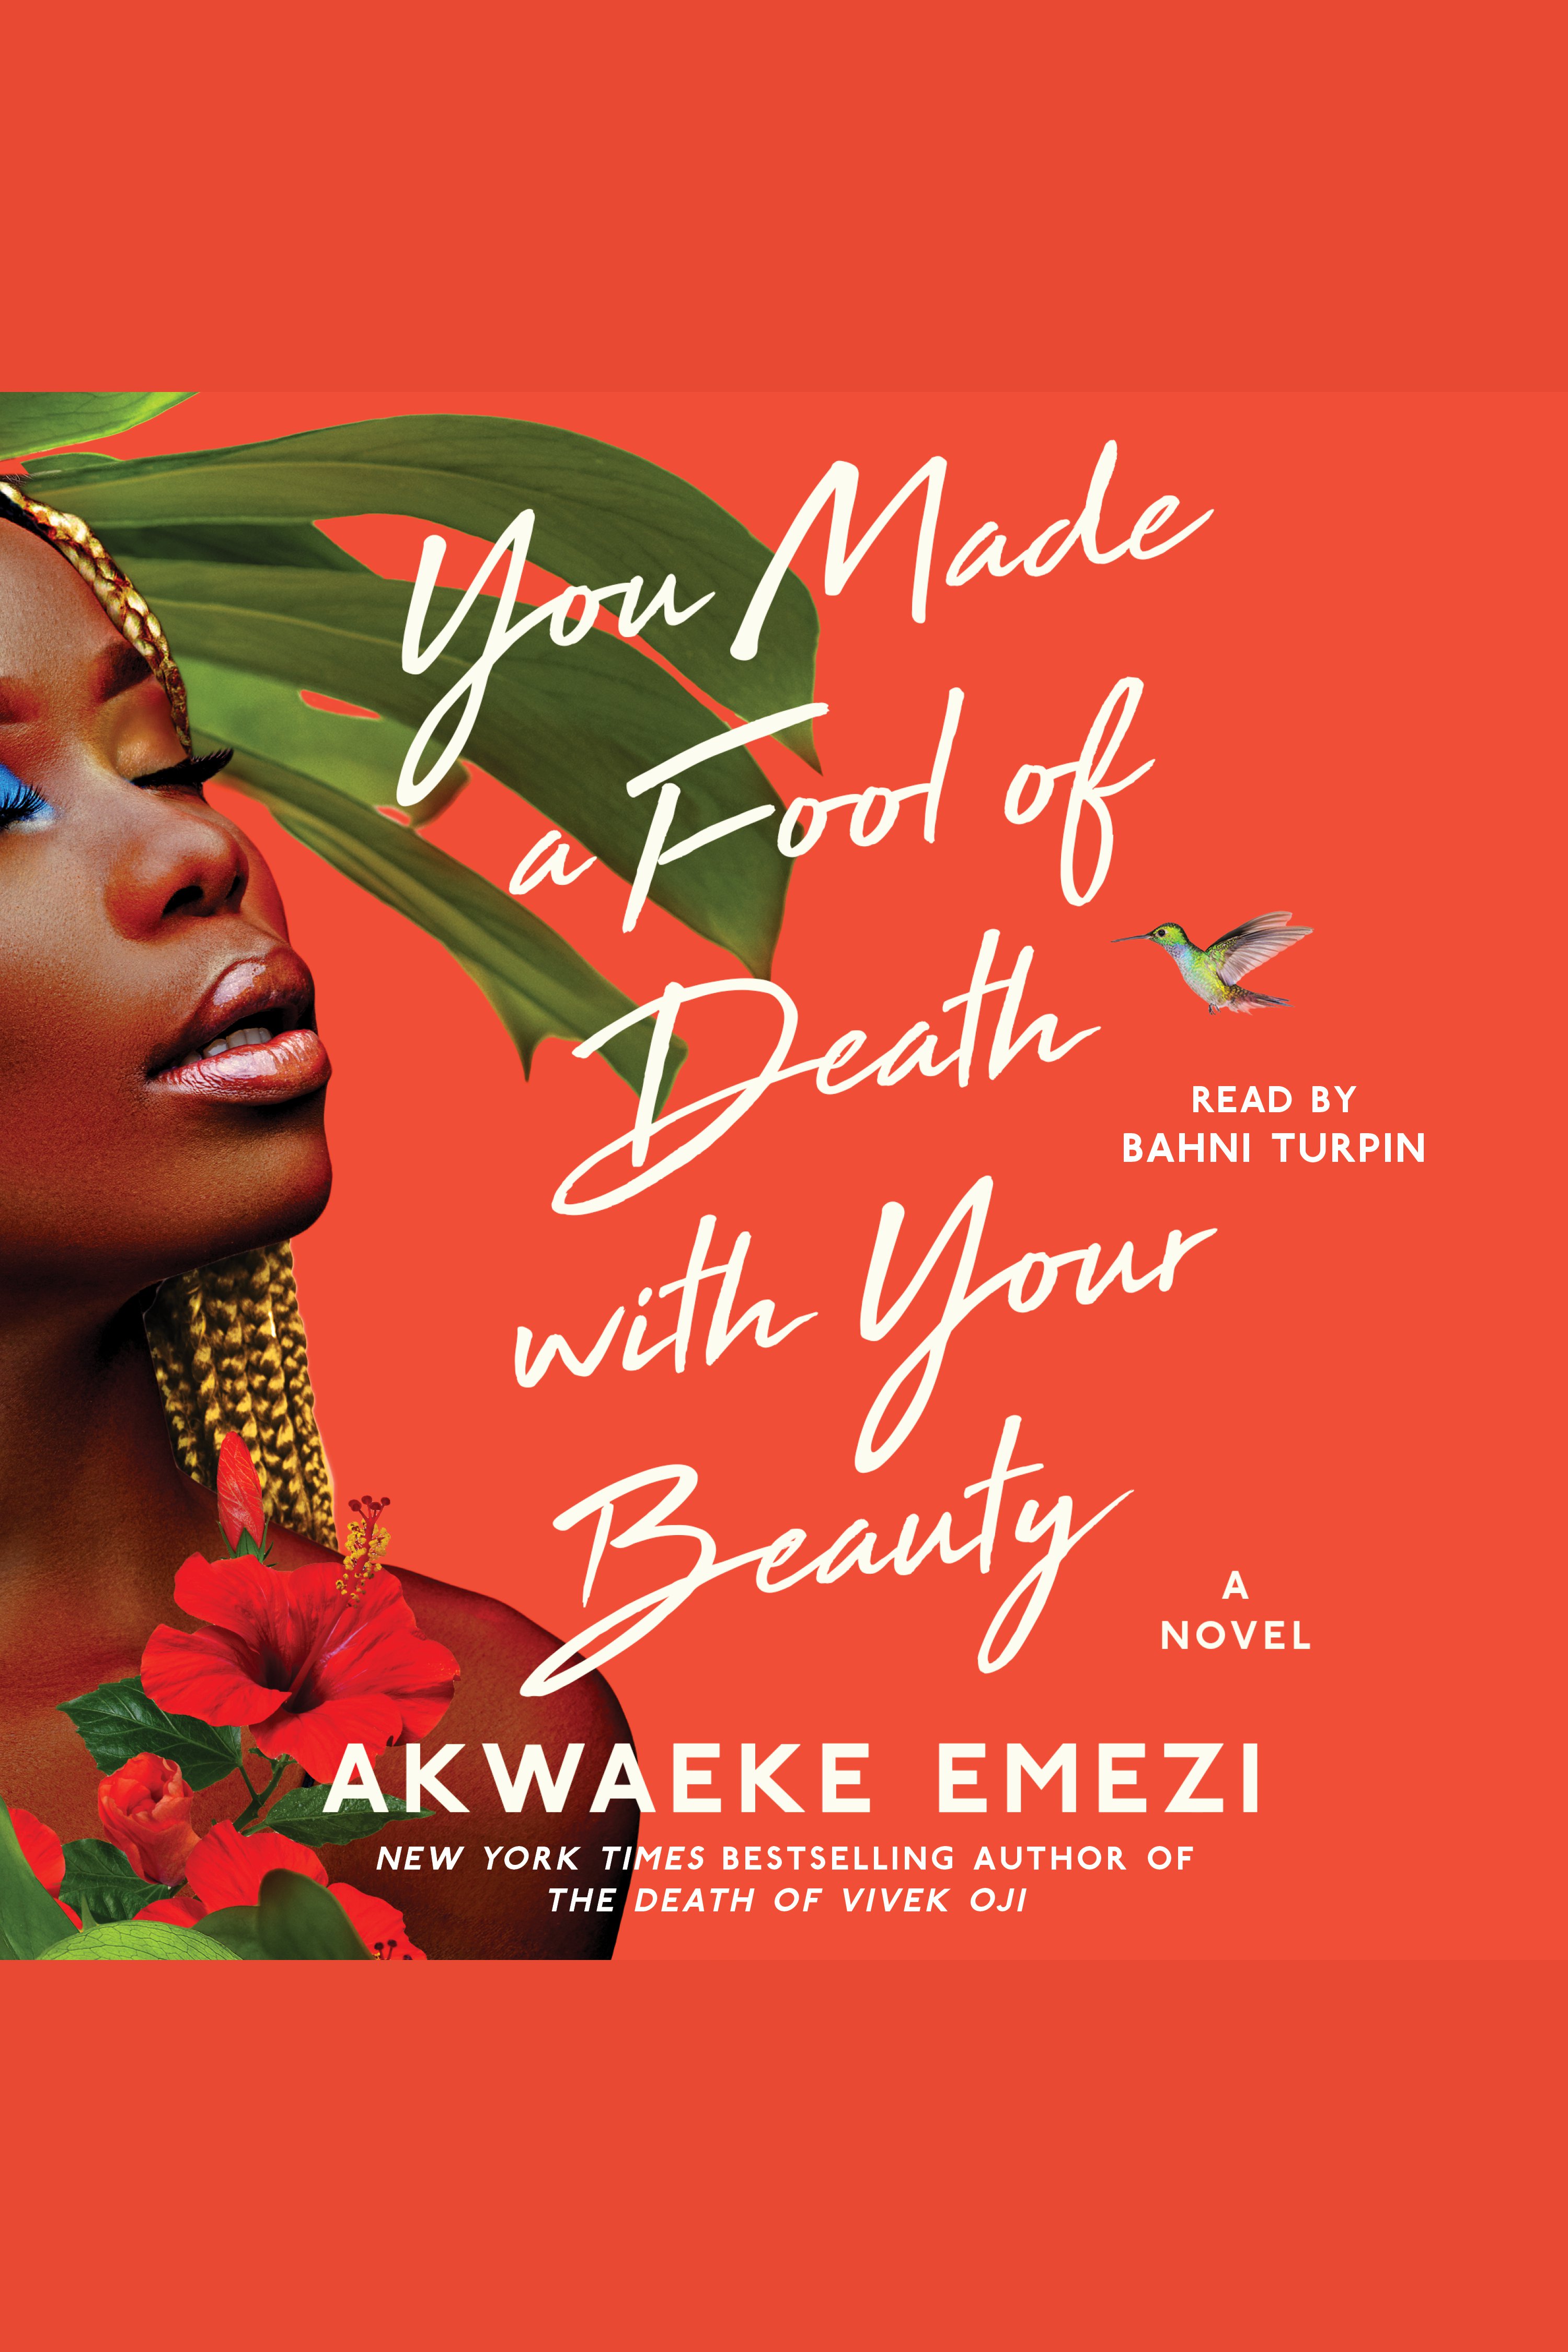 You Made a Fool of Death with Your Beauty cover image